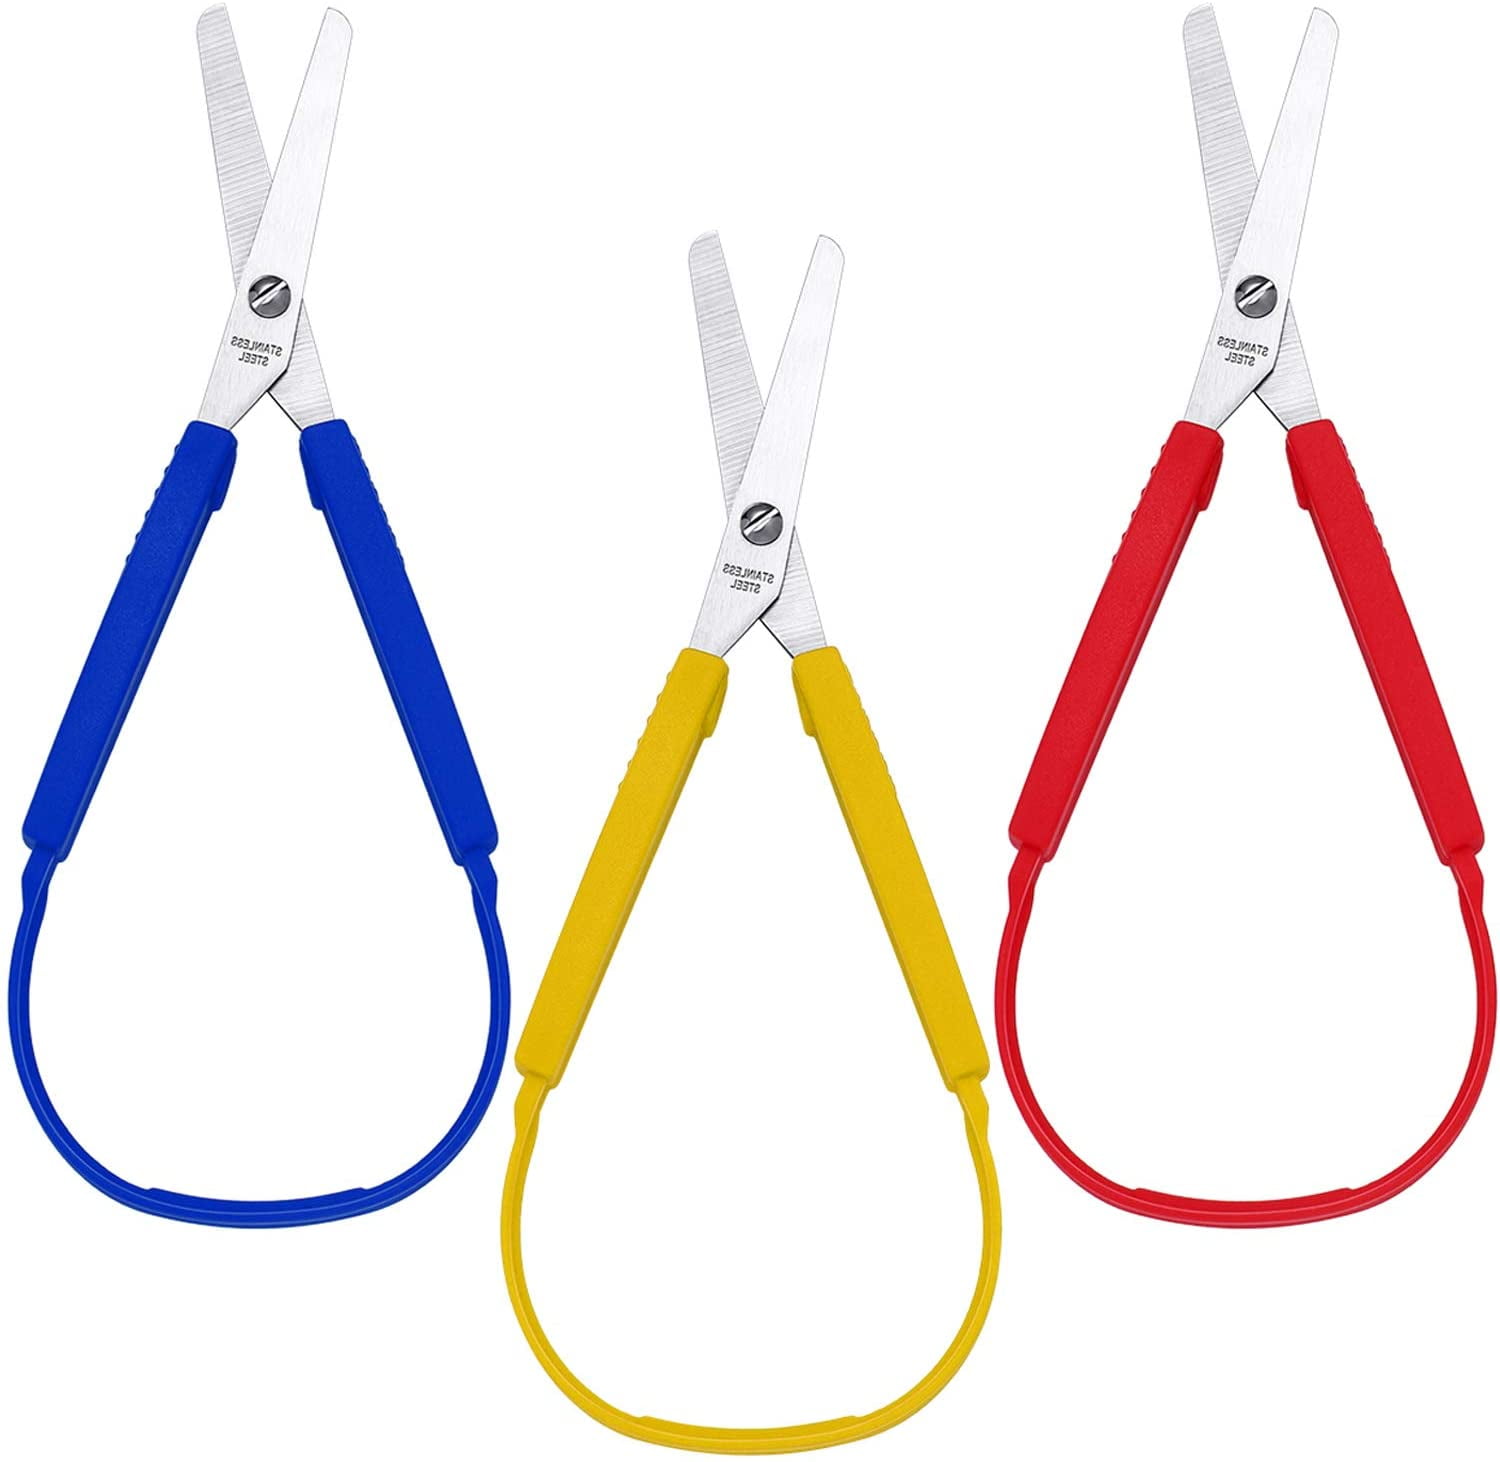 Large Loop Scissors for Teens and Adults 8 Inches (6-Pack)